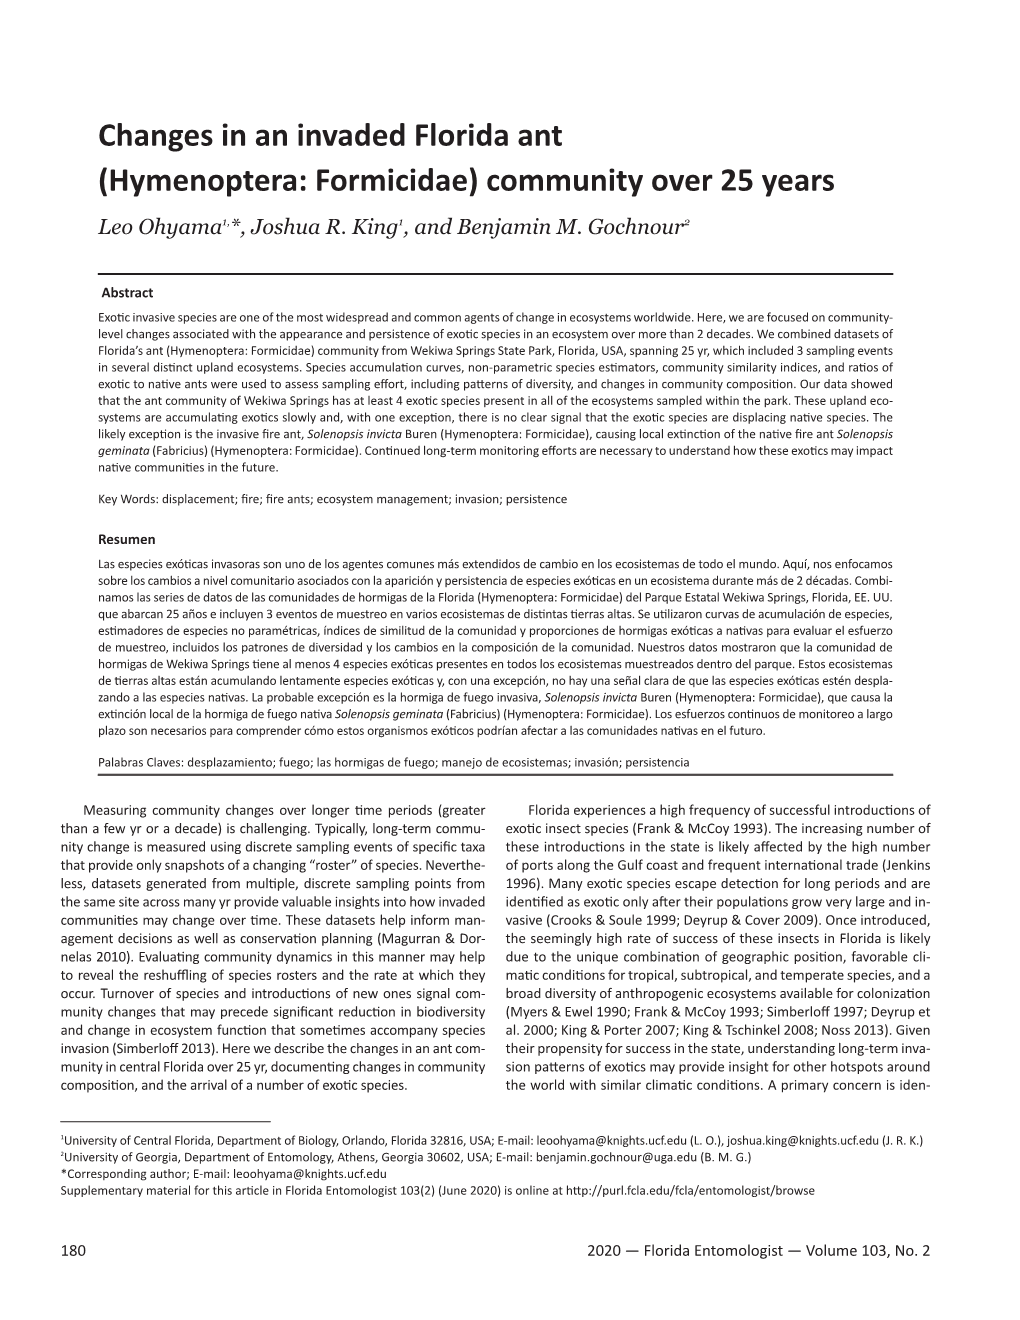 Hymenoptera: Formicidae) Community Over 25 Years